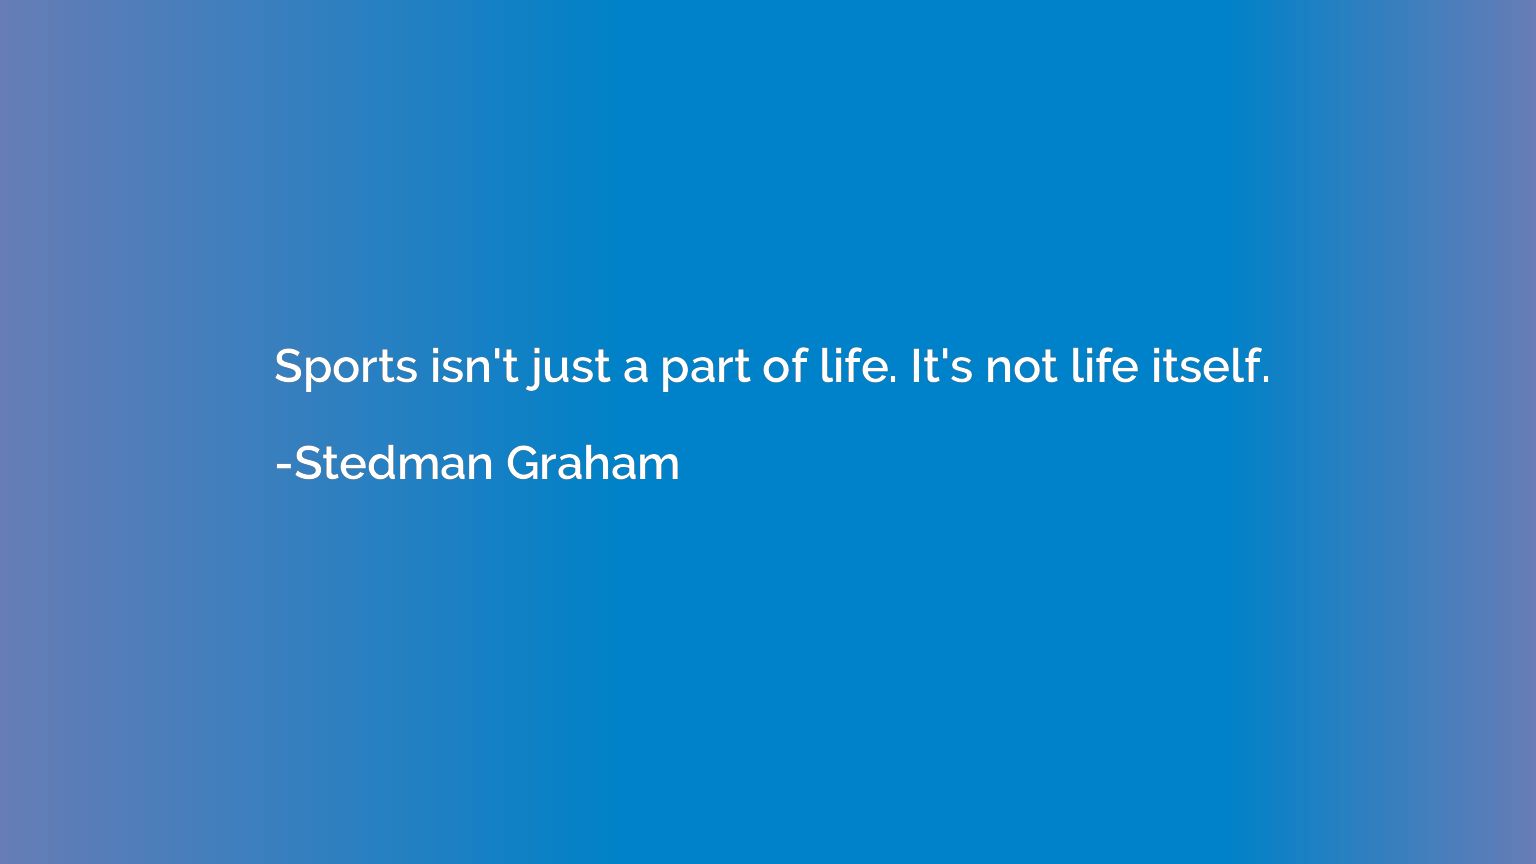 Sports isn't just a part of life. It's not life itself.